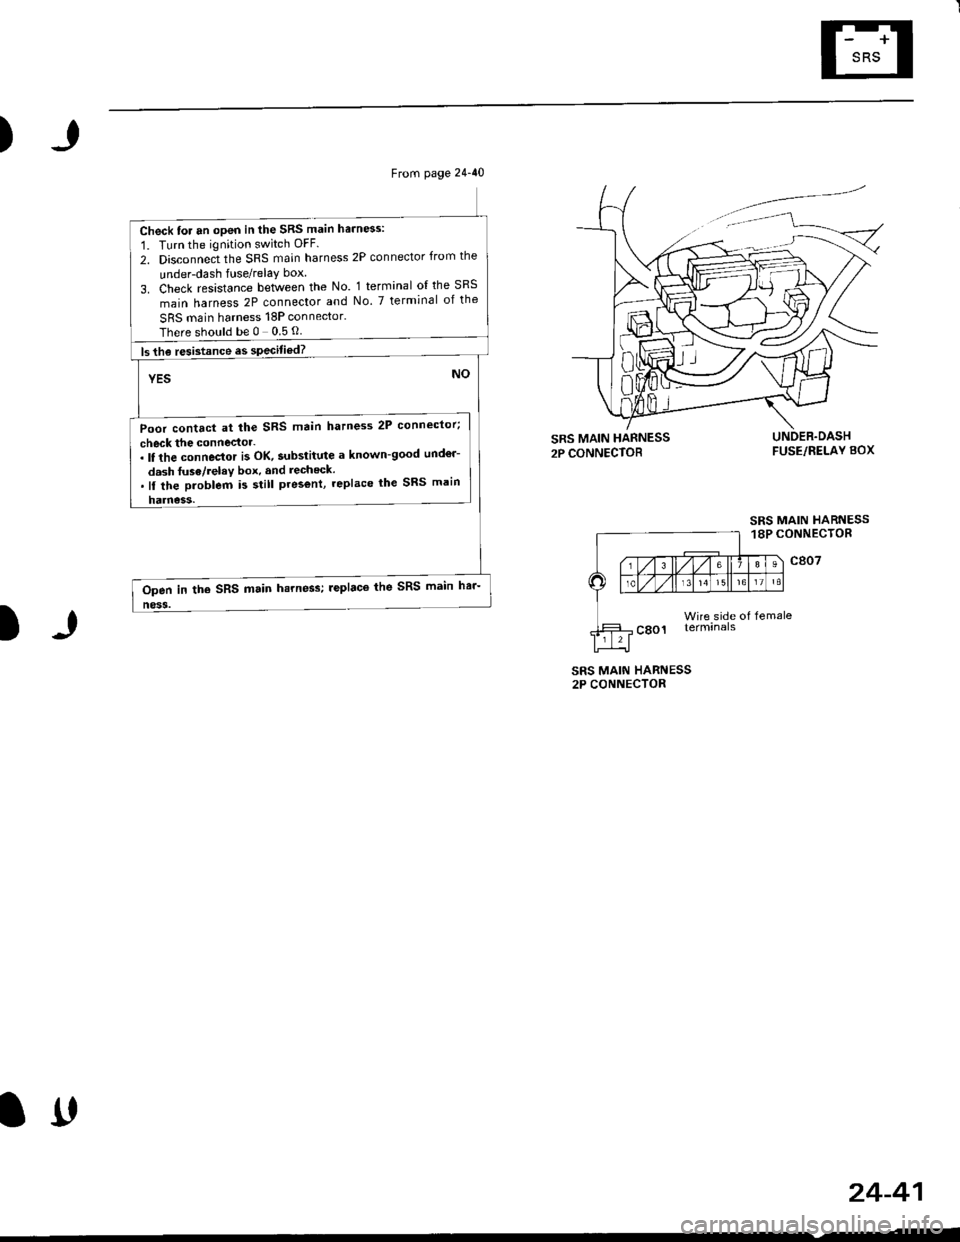 HONDA CIVIC 1998 6.G Owners Guide )
From page 24-40
Check for an open in the SRS main harn6s:
1. Turn the ignition switch OFF.
2. Disconnect the SRS main harness 2P connector from the
under-dash fuse/relay box
3. Check resistance betw